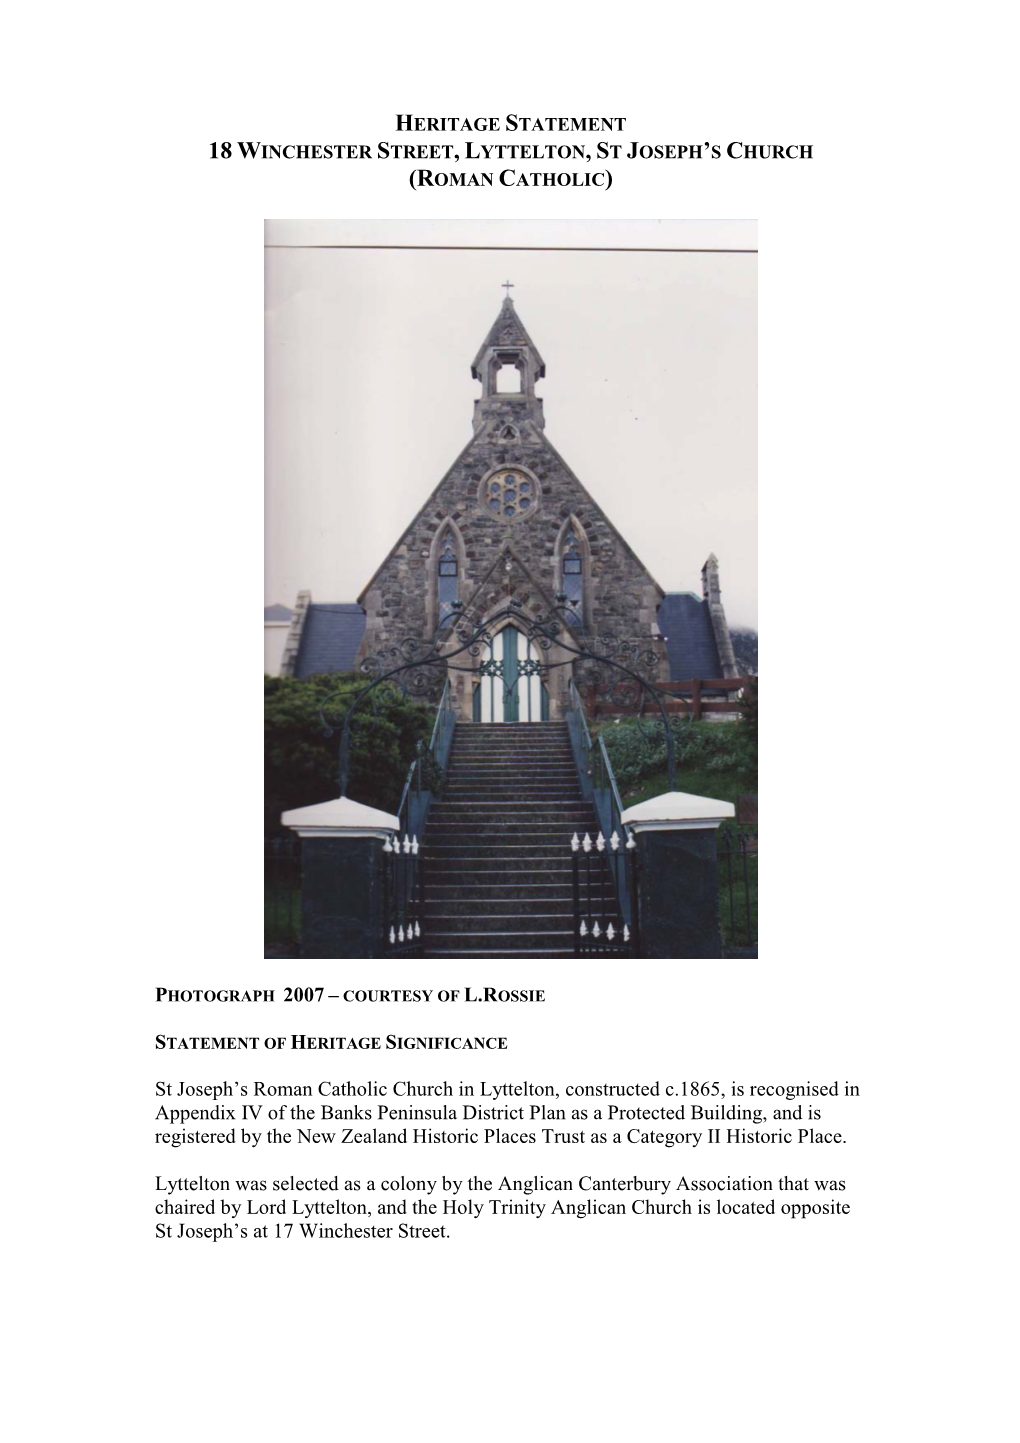 St Joseph's Roman Catholic Church in Lyttelton, Constructed C.1865, Is Recognised in Appendix IV of the Banks Peninsula Distri